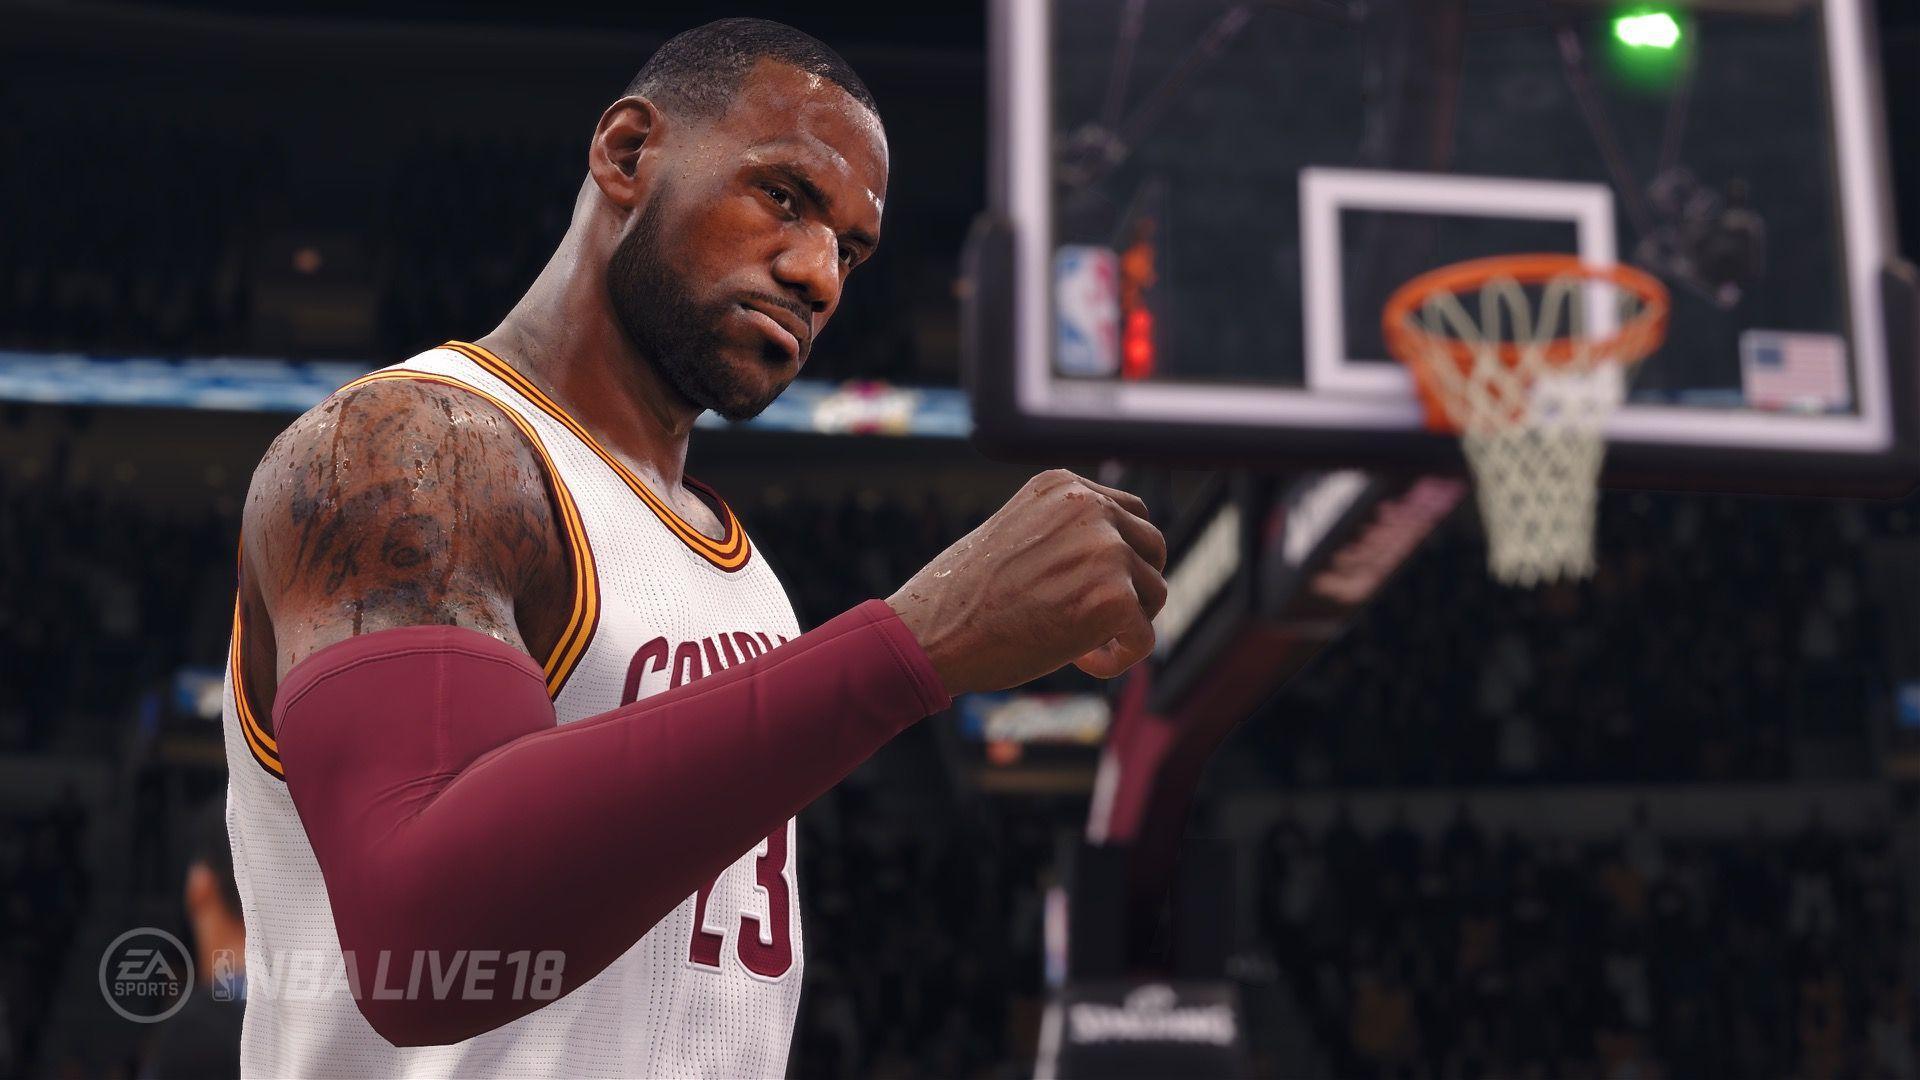 NBA Live 18 demo lets you carry over progress to the full game